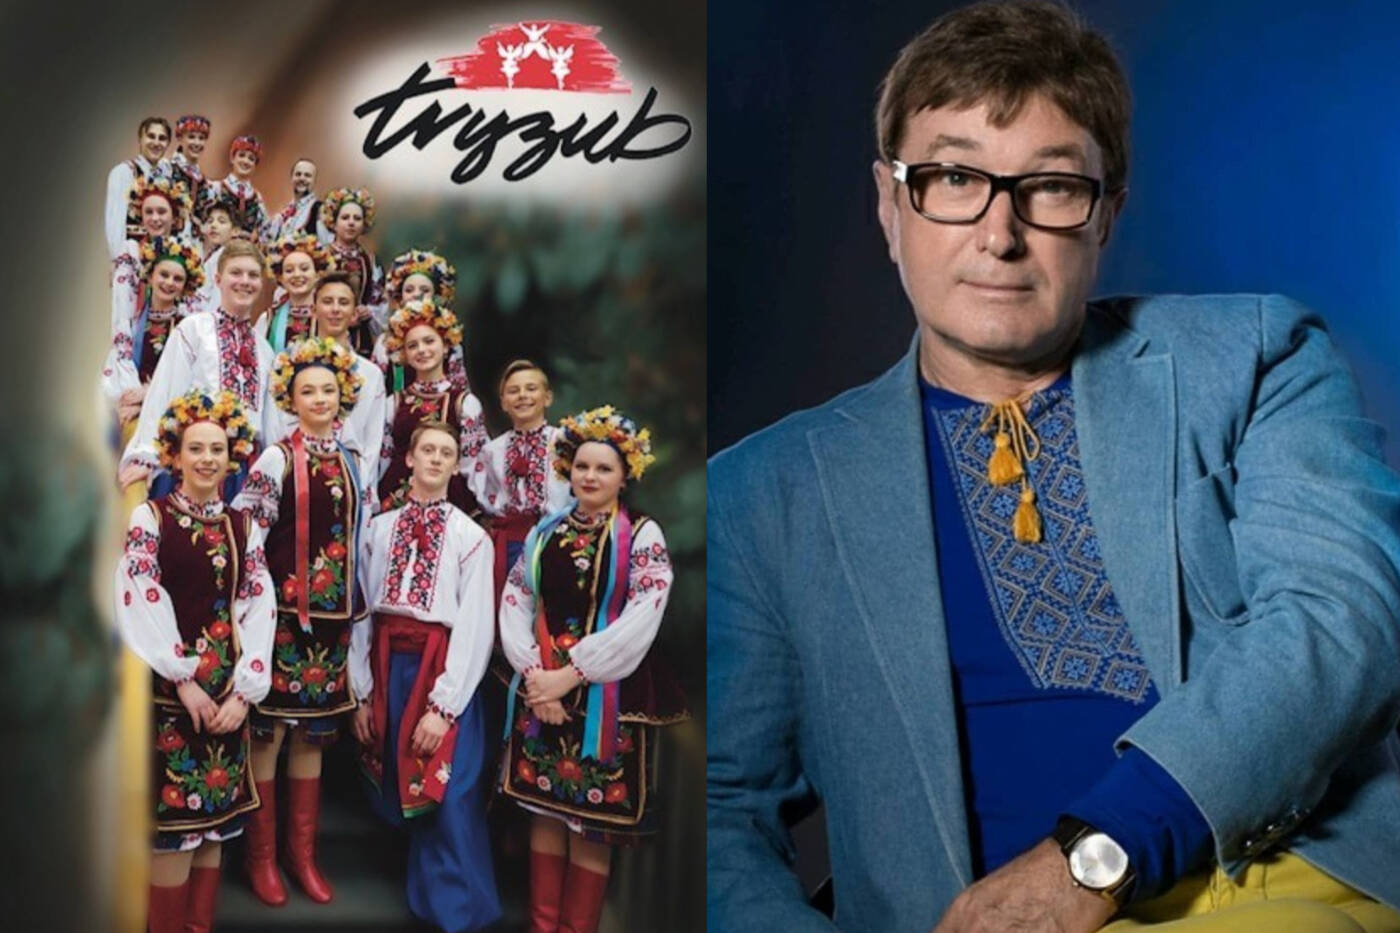 The Tryzub dance group and Ukrainian merited artist Ihor Bohdan will be performing in two fundraiser concerts in the South Okanagan, including one at Venables Theatre in Oliver. (Venables Theatre)